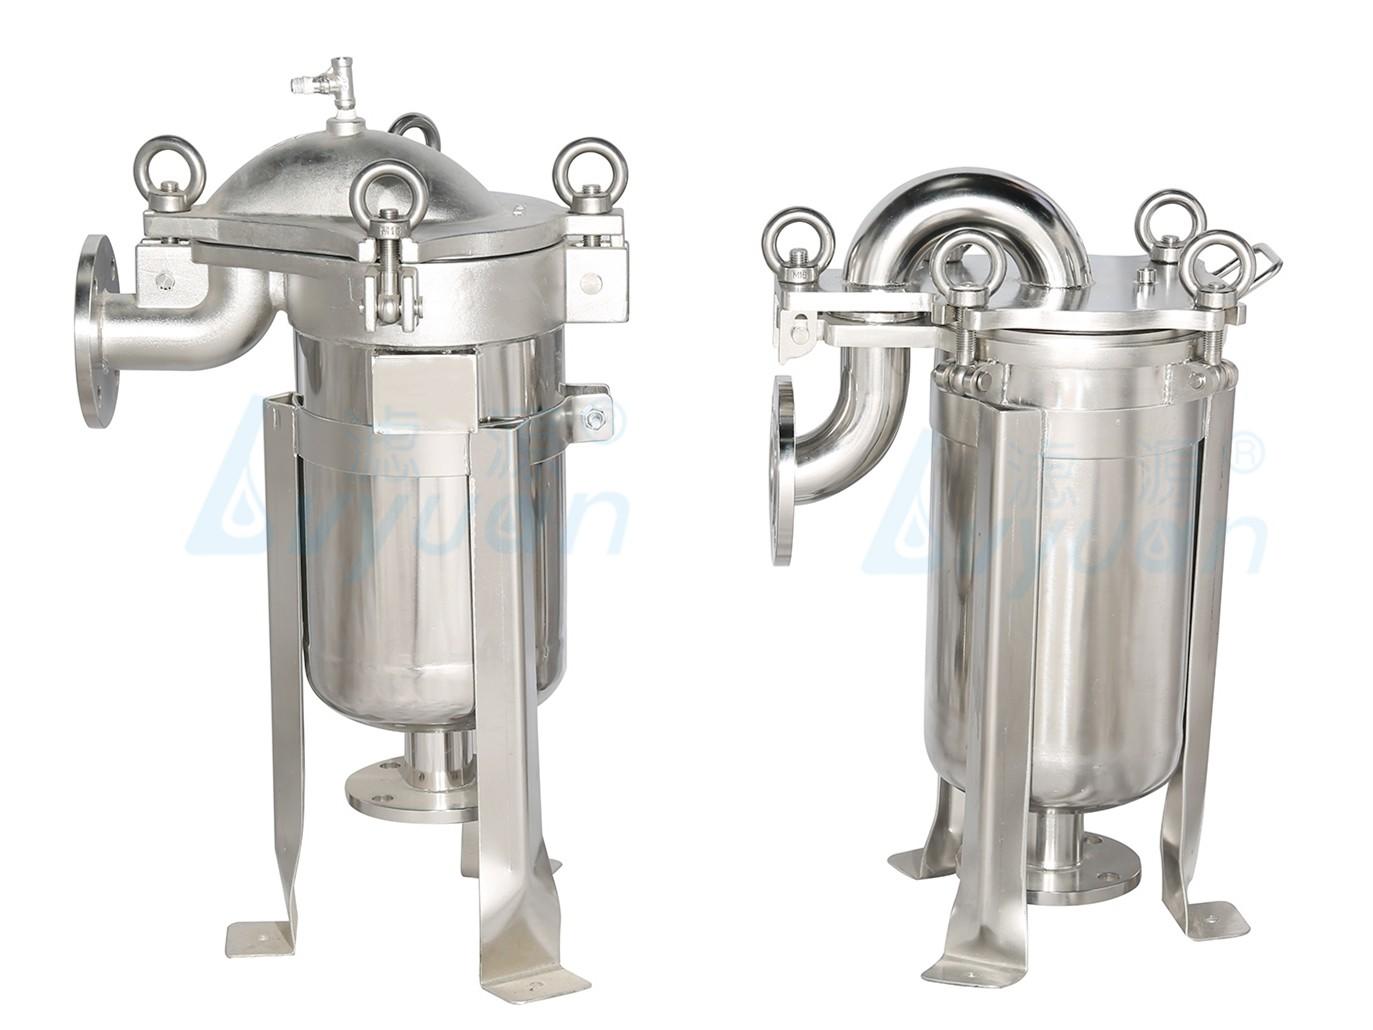 Lvyuan professional stainless steel water filter housing with core for food and beverage